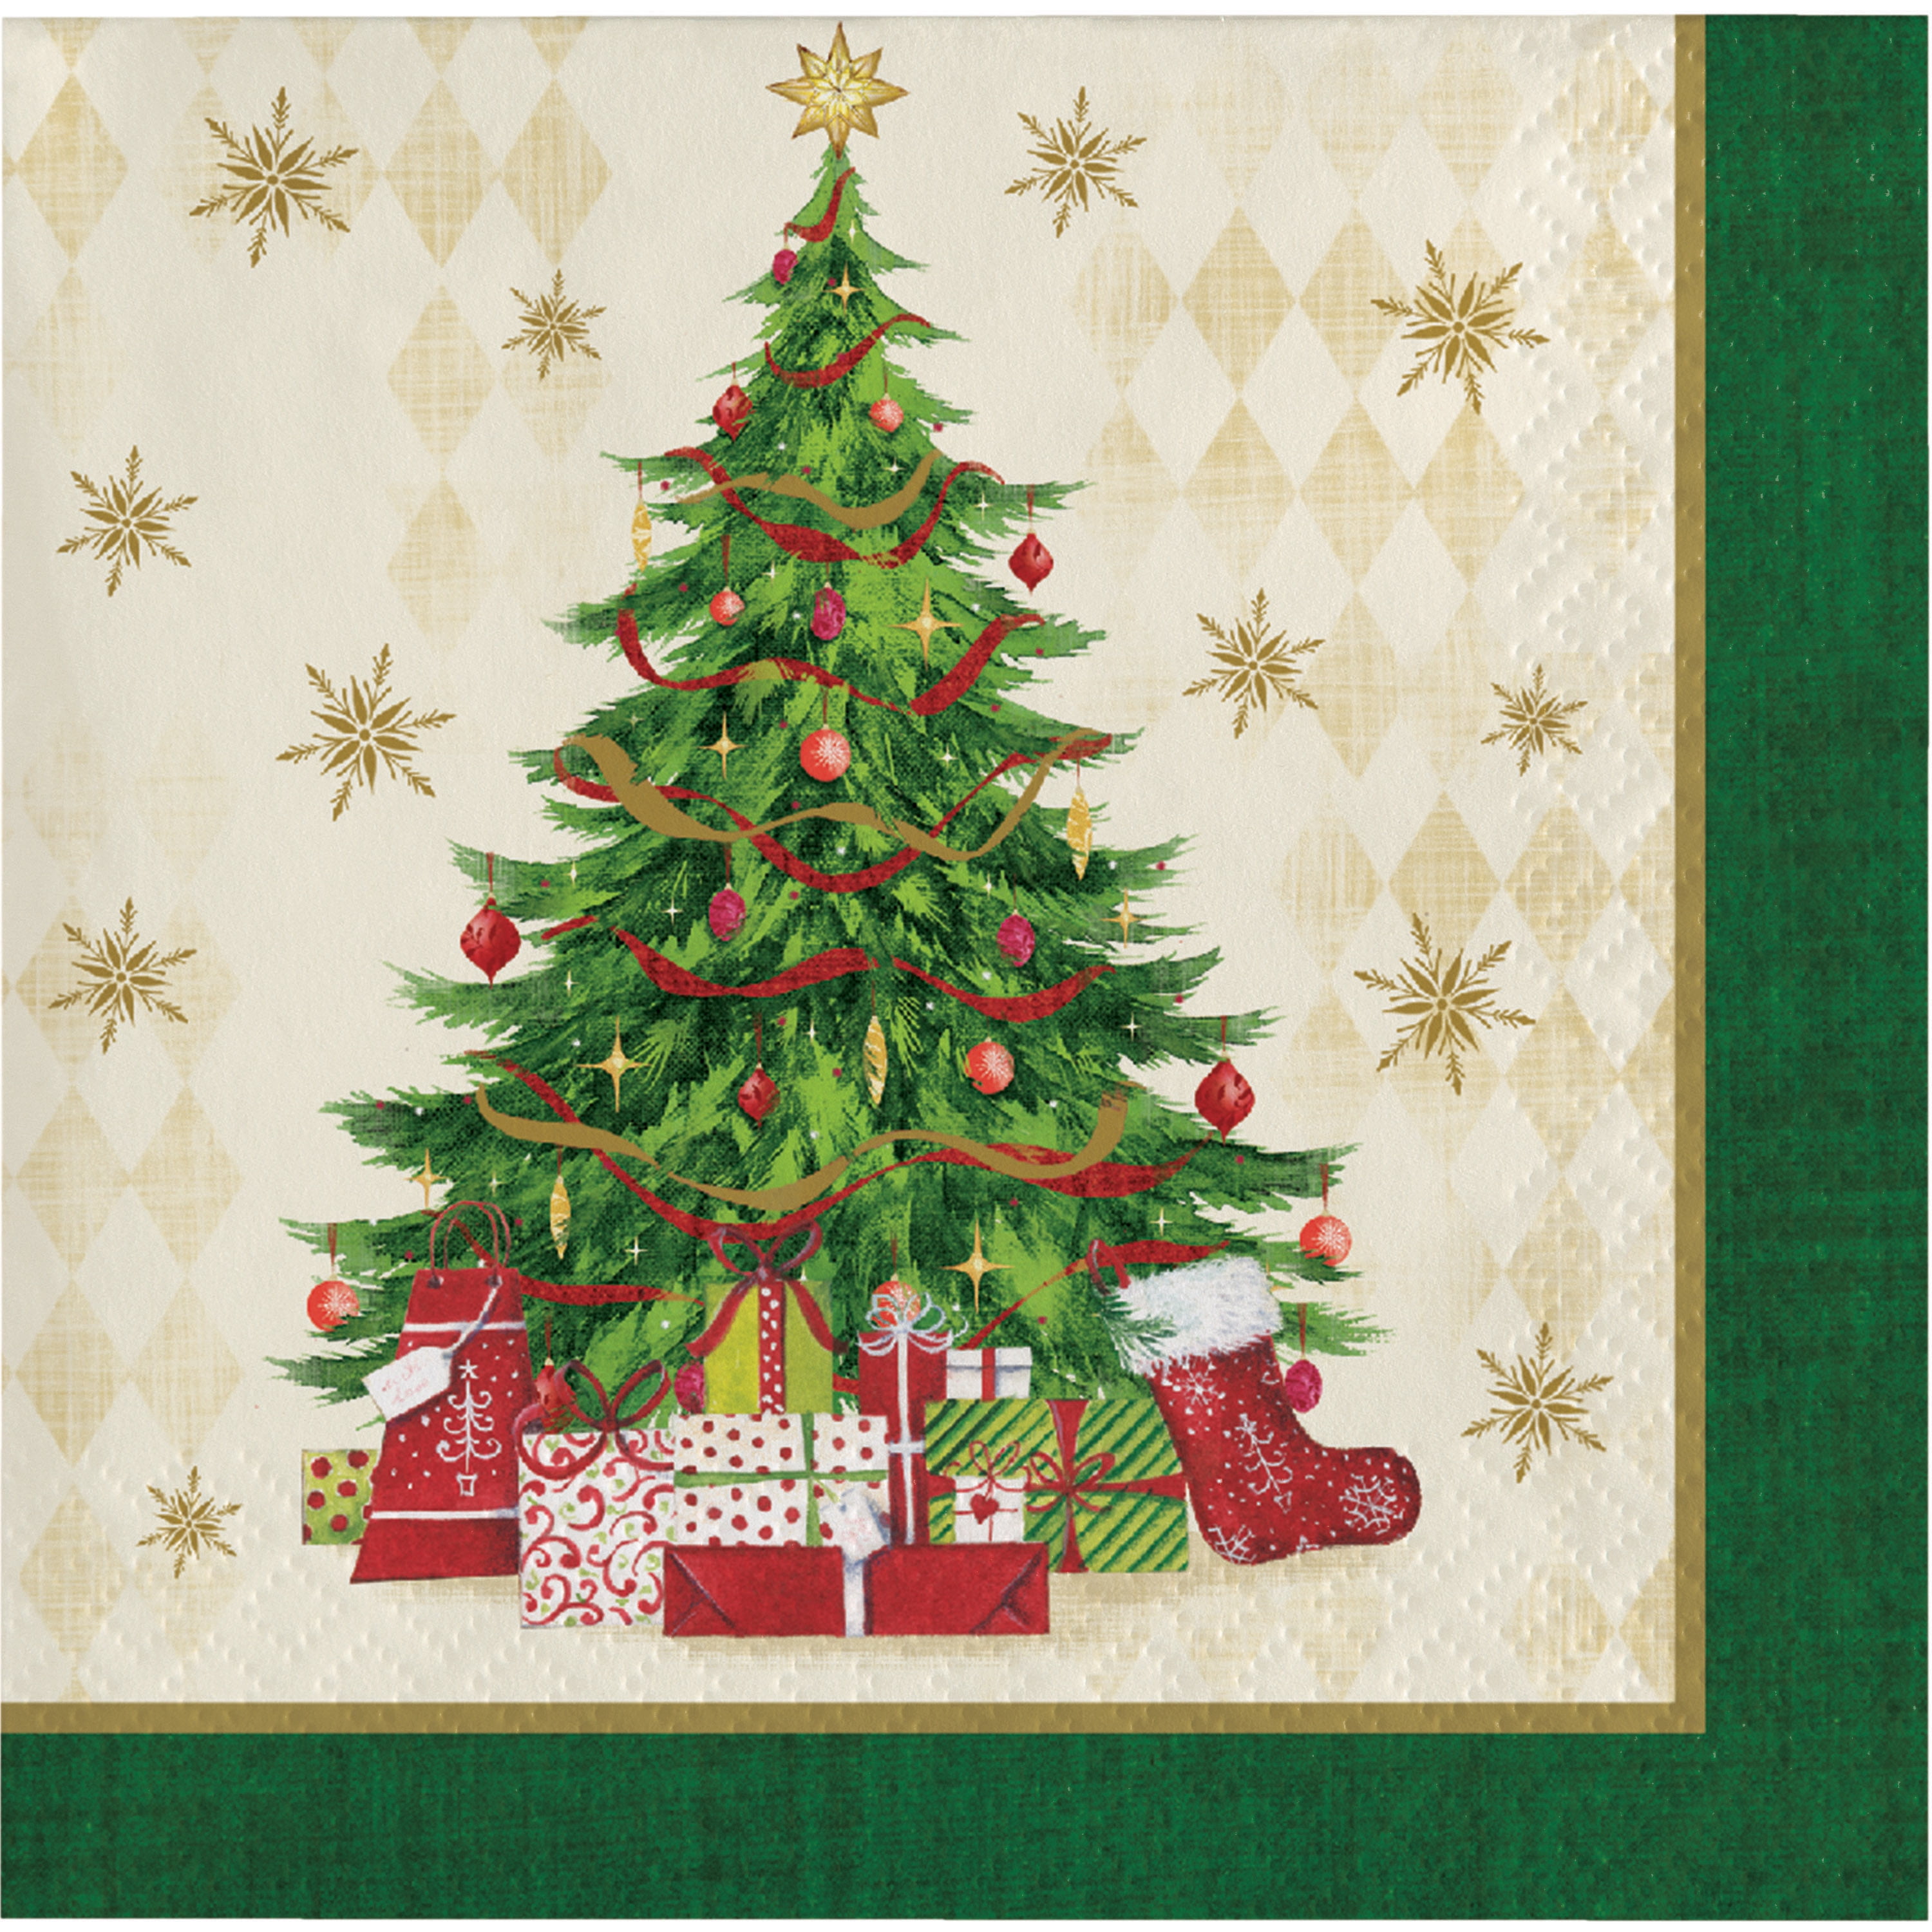 Details about   BNIP New 20 Christmas Paper Napkins 3 ply 25x25cm Christmas Tree Merry Christmas 